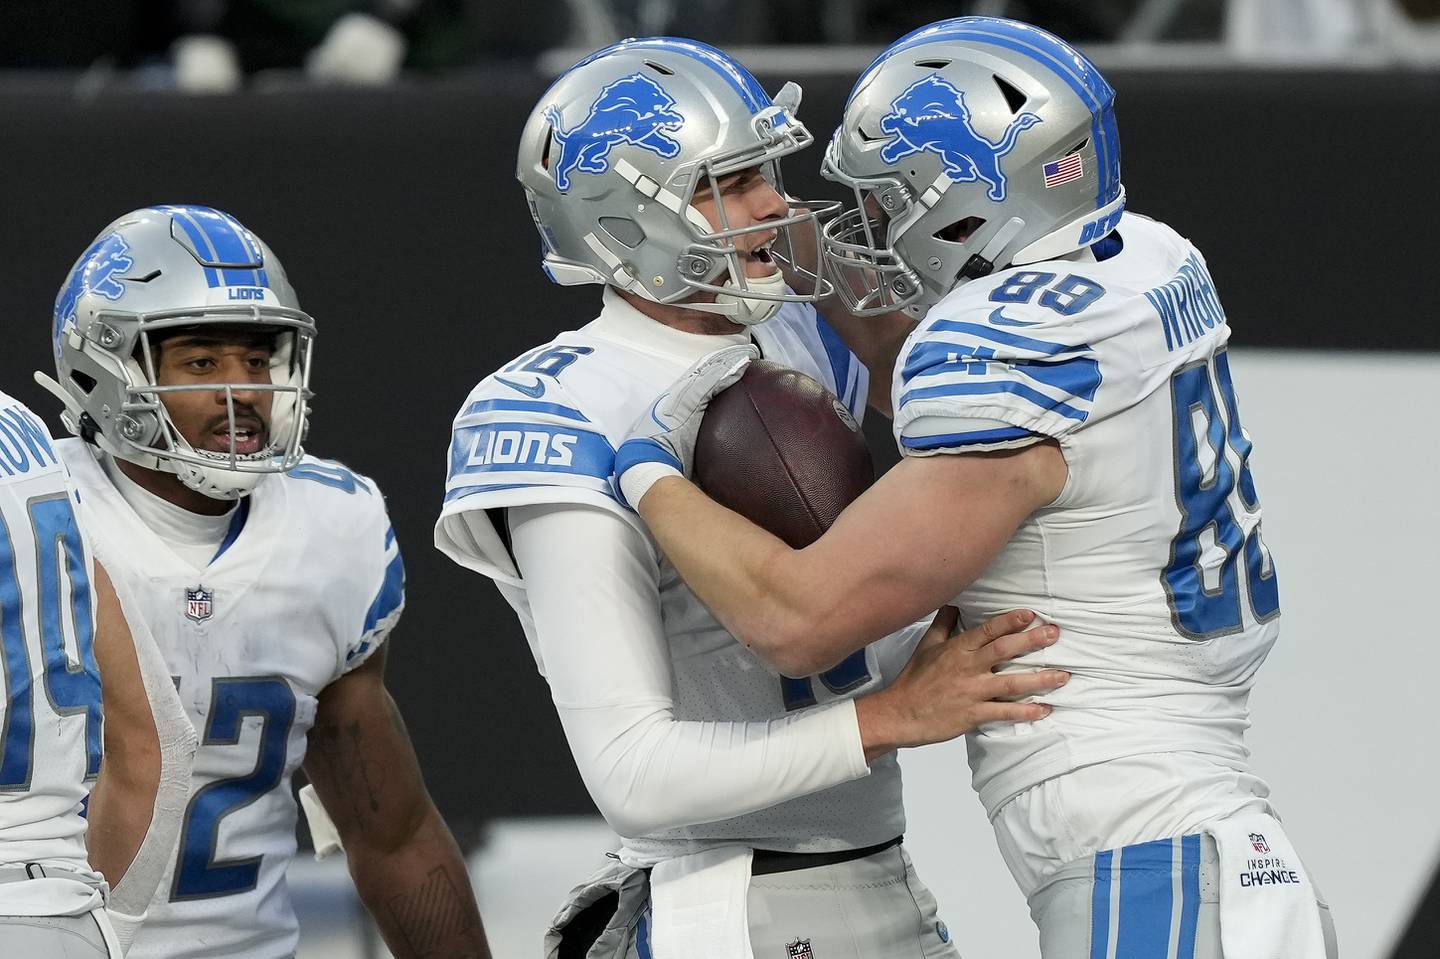 Brock Wright celebrates with quarterback Jared Goff (16) after a touchdown in the Lions' victory against the Jets on Dec. 18 in East Rutherford, N.J. 